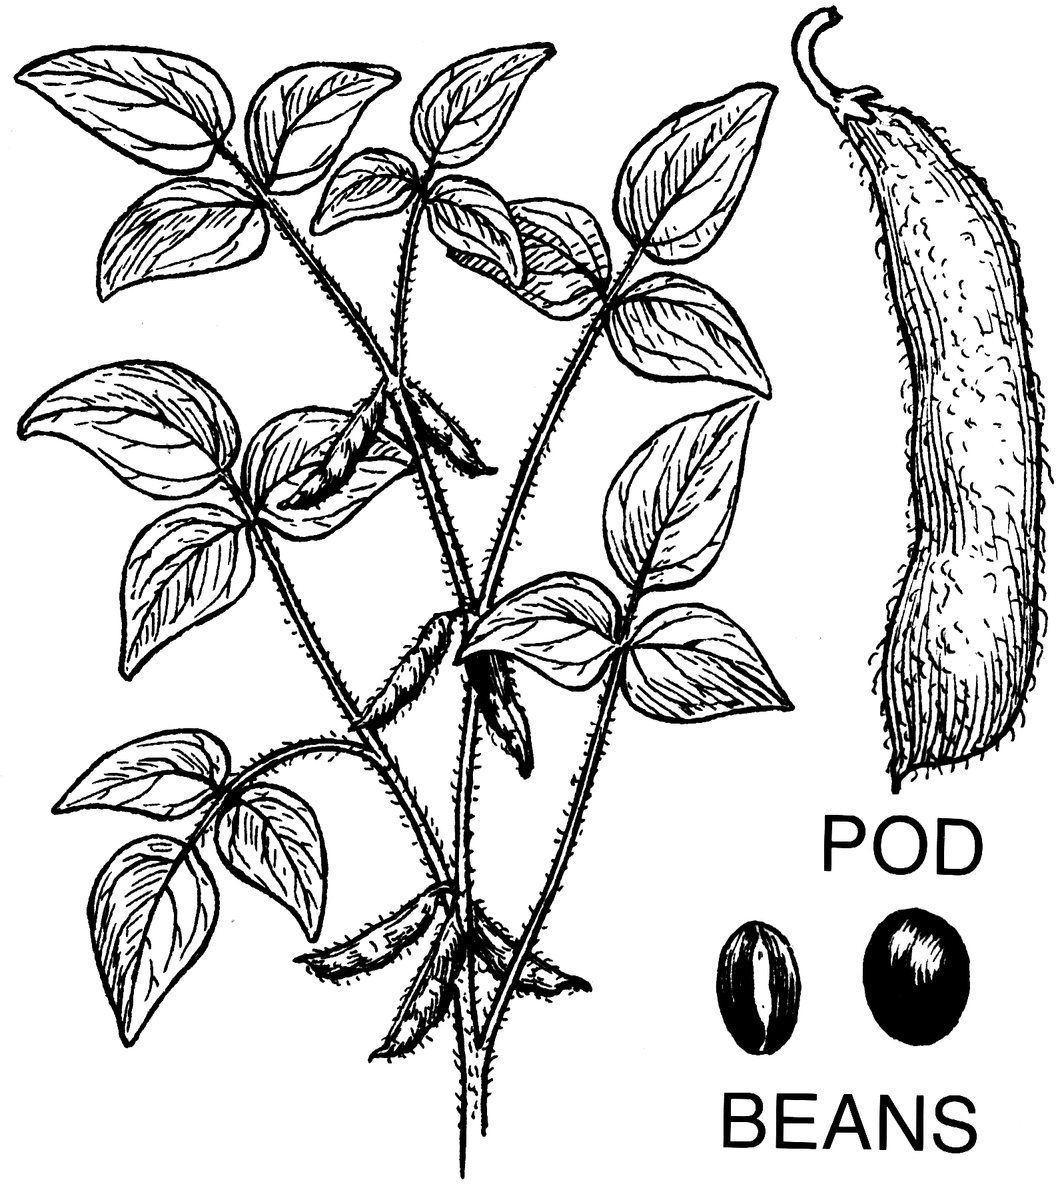 a drawing of the soybean plant, pod and beans